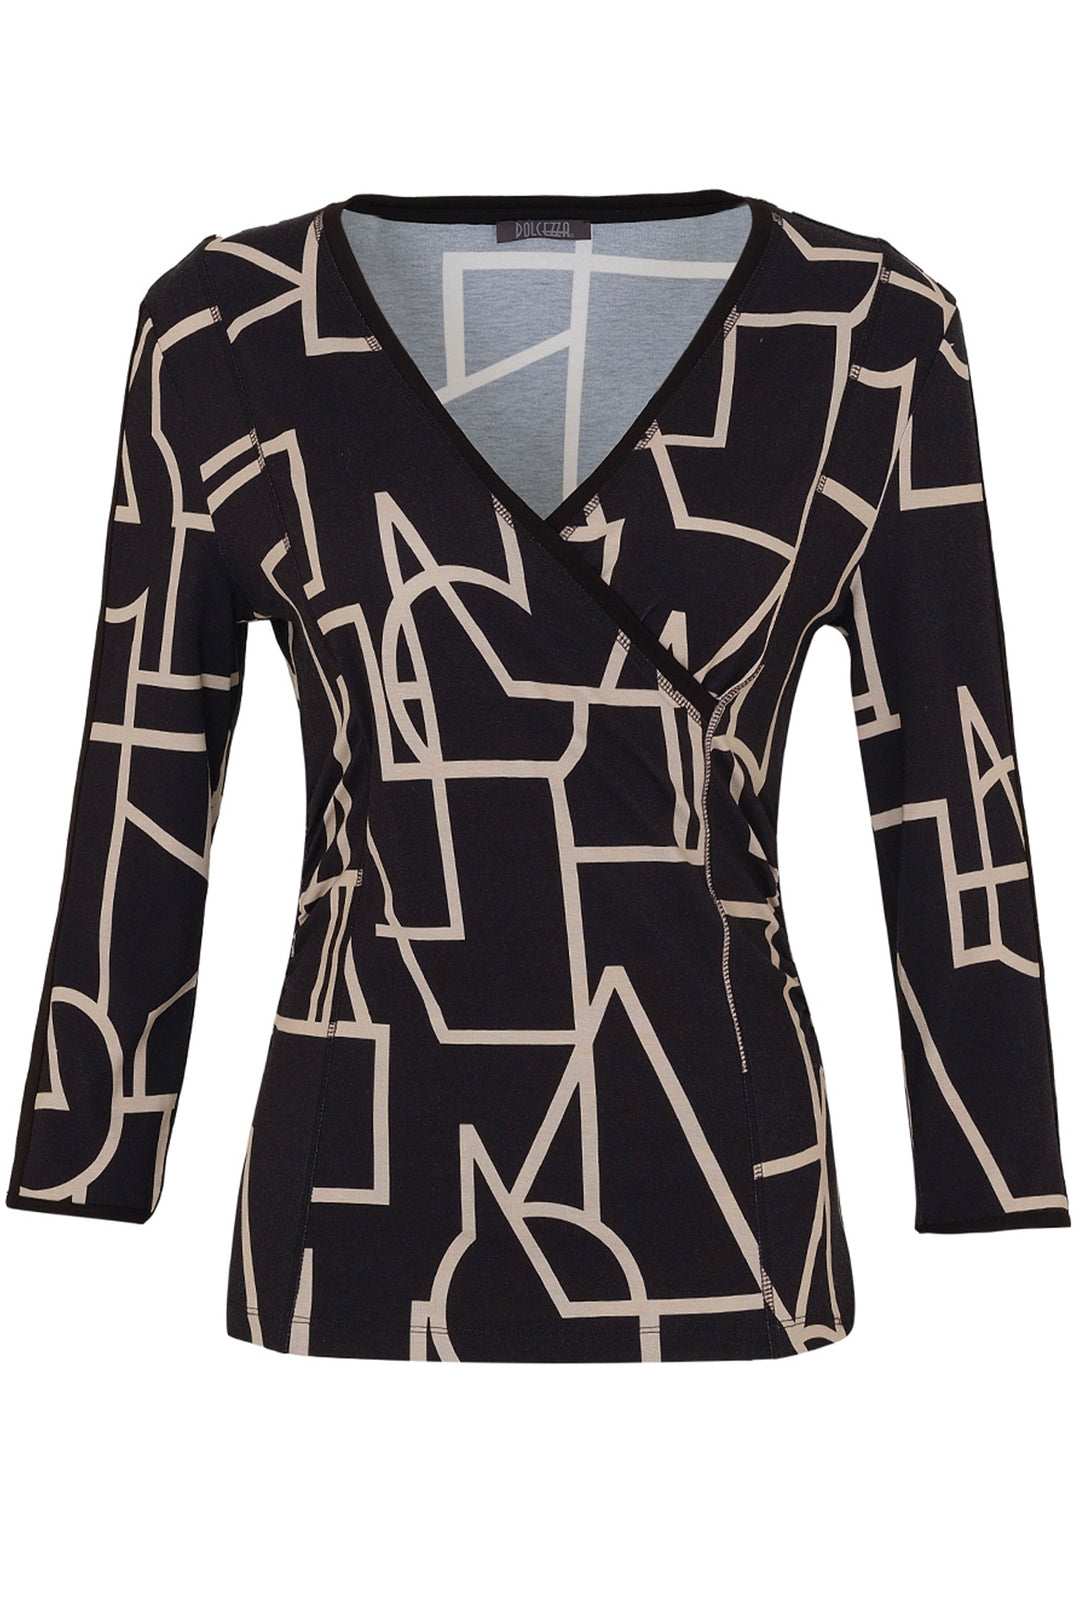 With its all-over geometric print, flattering cross-over v-neckline, 3/4 length sleeves, fitted wrap style, stretch fabric, you'll be sure to turn heads.